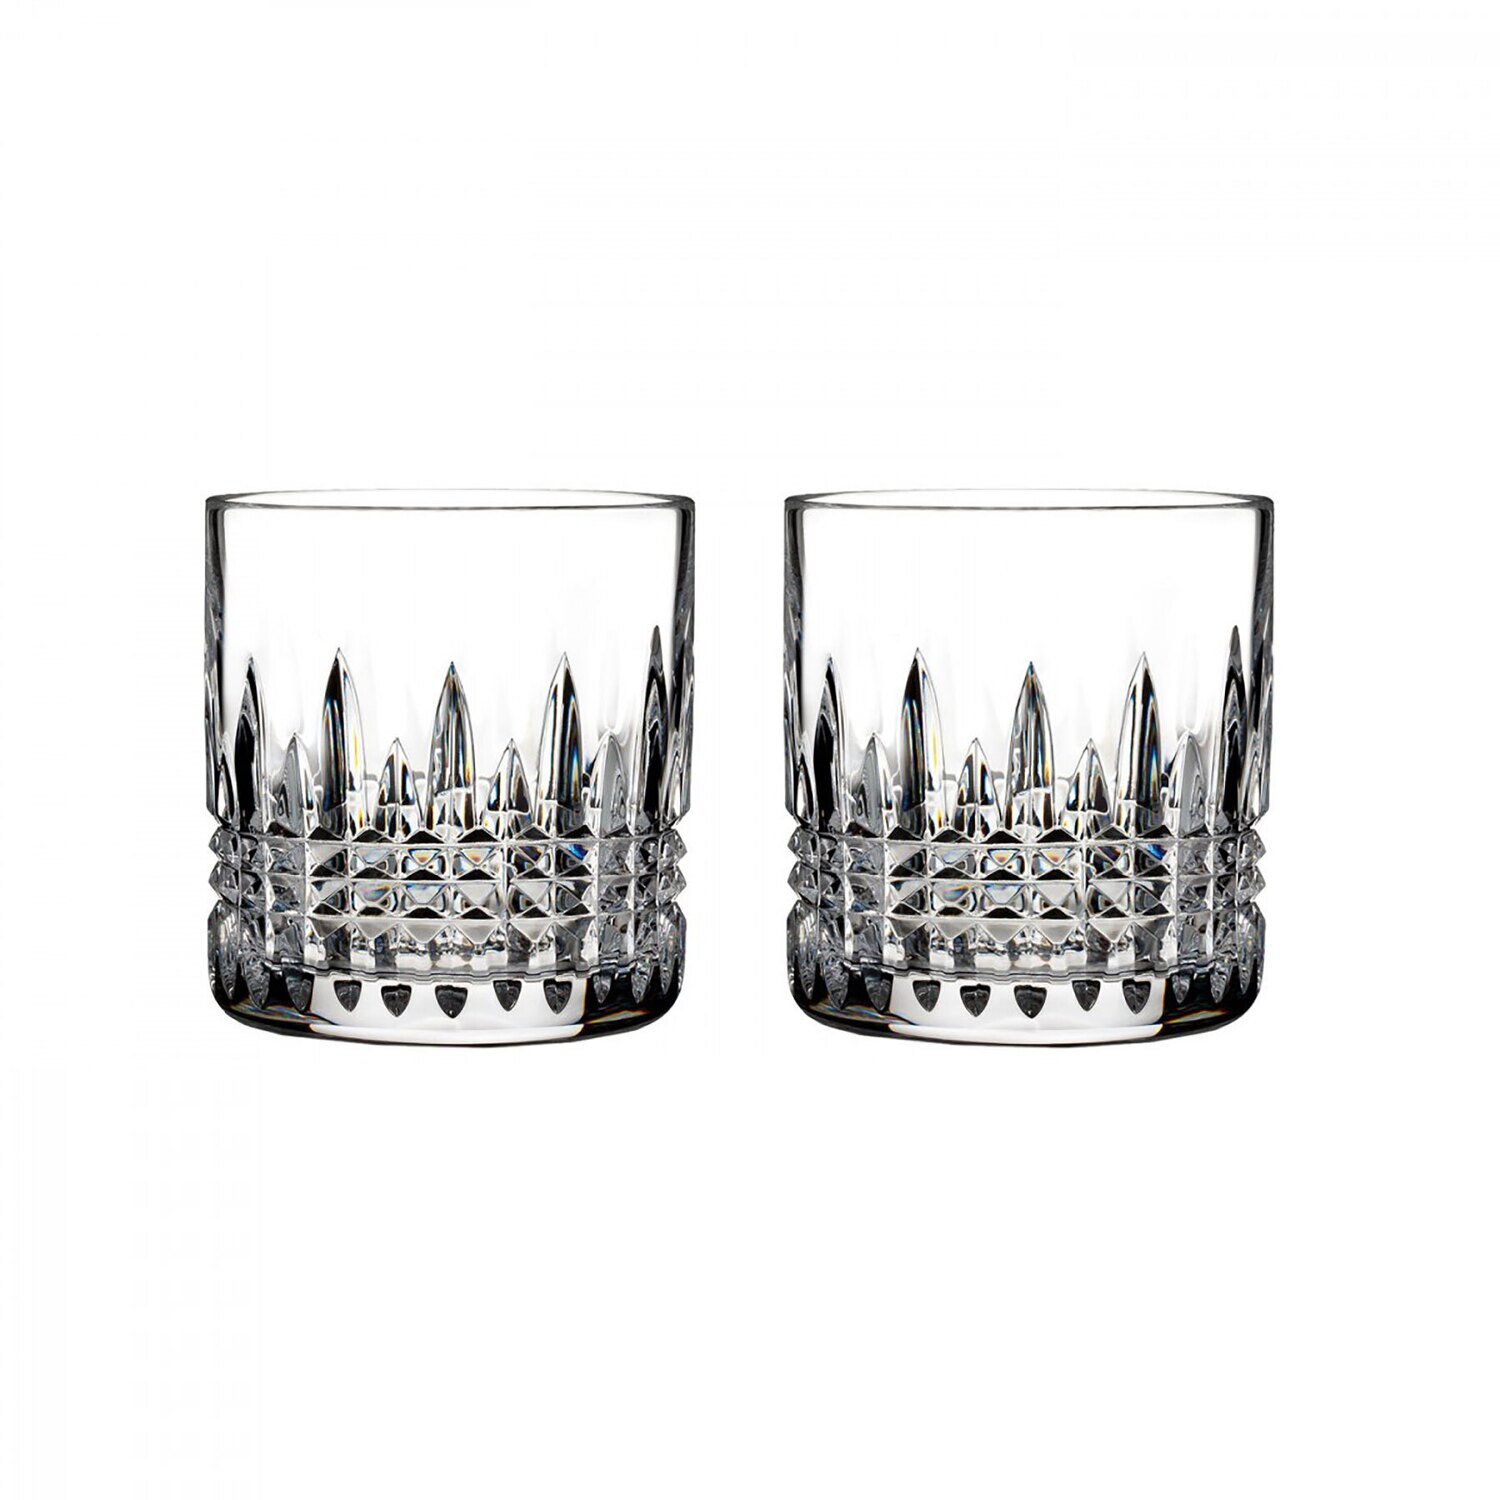 Waterford Lismore Connoisseur Diamond Straight Sided Tumbler 7 Oz Set of 2 40010701